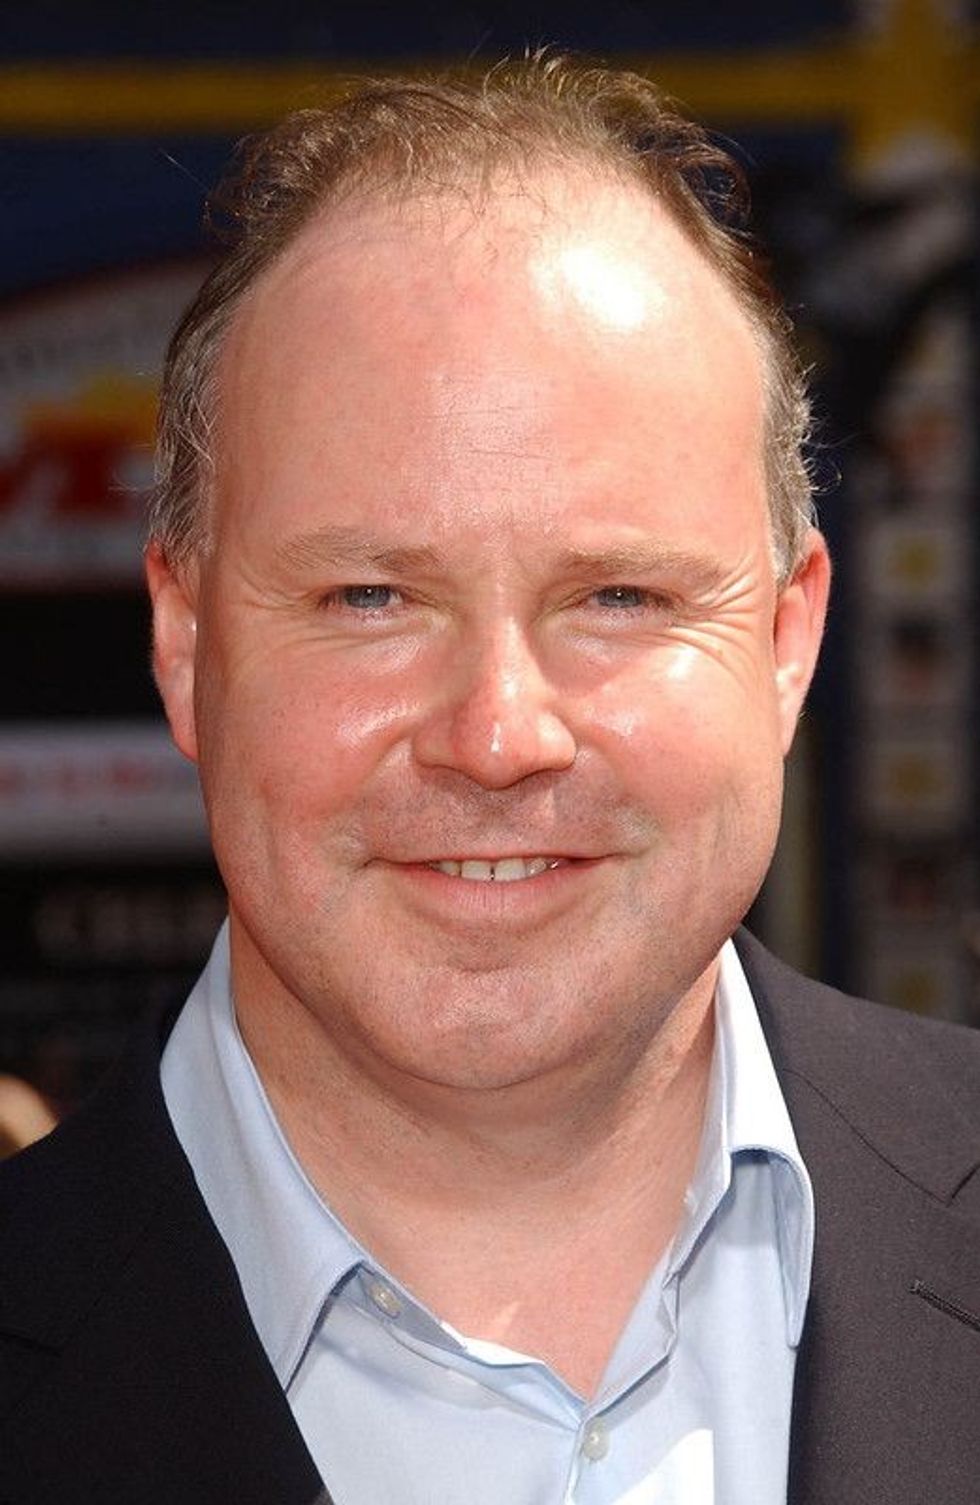 David Yates is famous for directing the 'Fantastic Beasts' series of films, based on books written by J. K. Rowling.